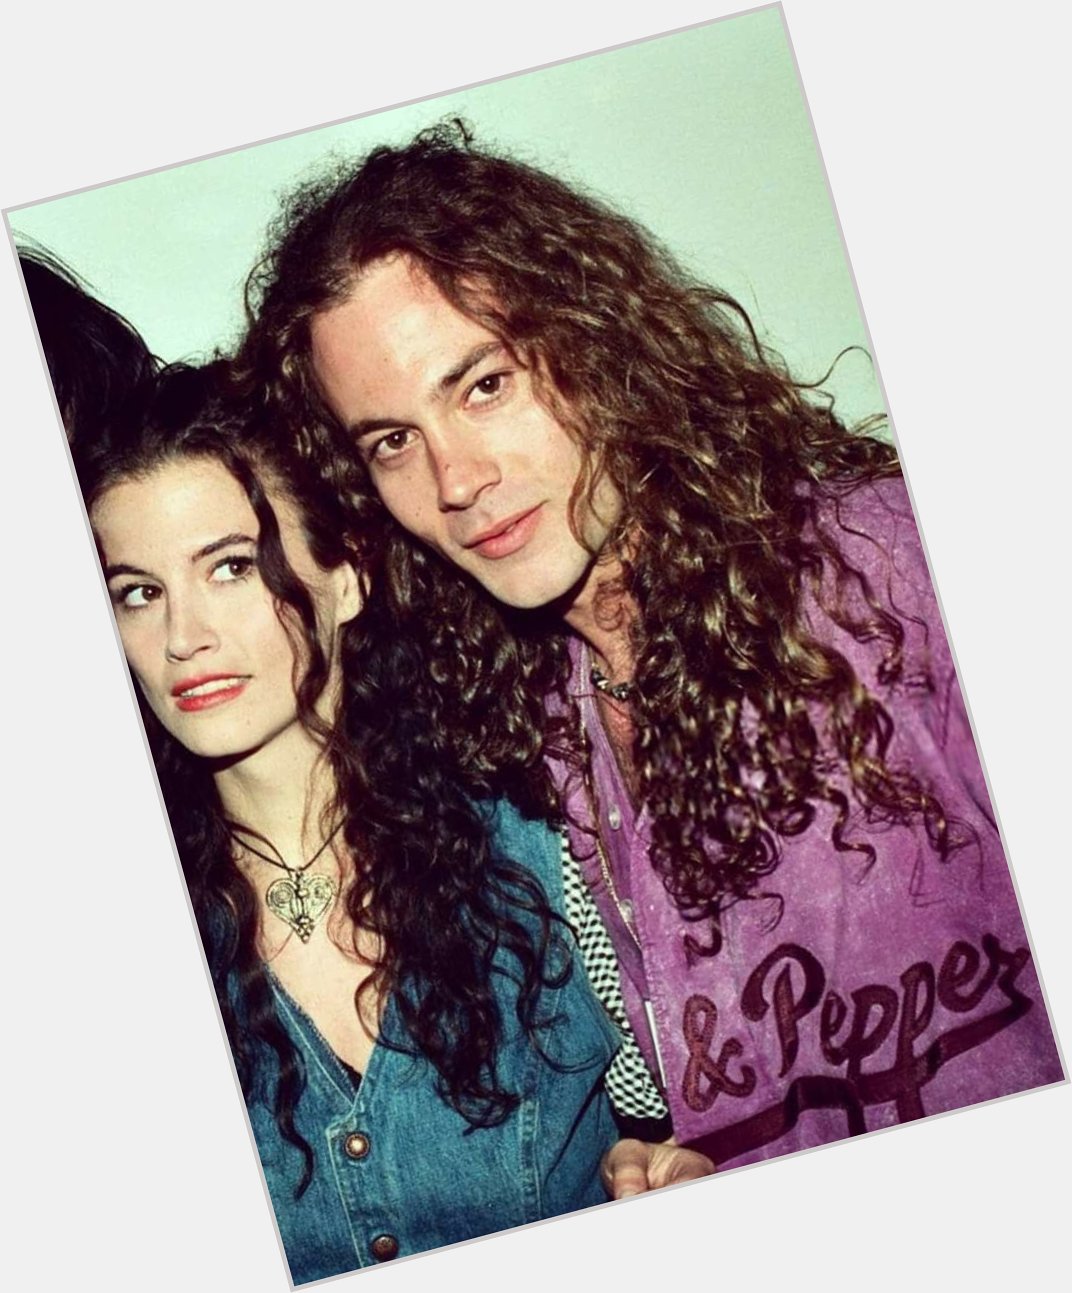 Happy birthday to mike starr <3 we love and miss you so much 